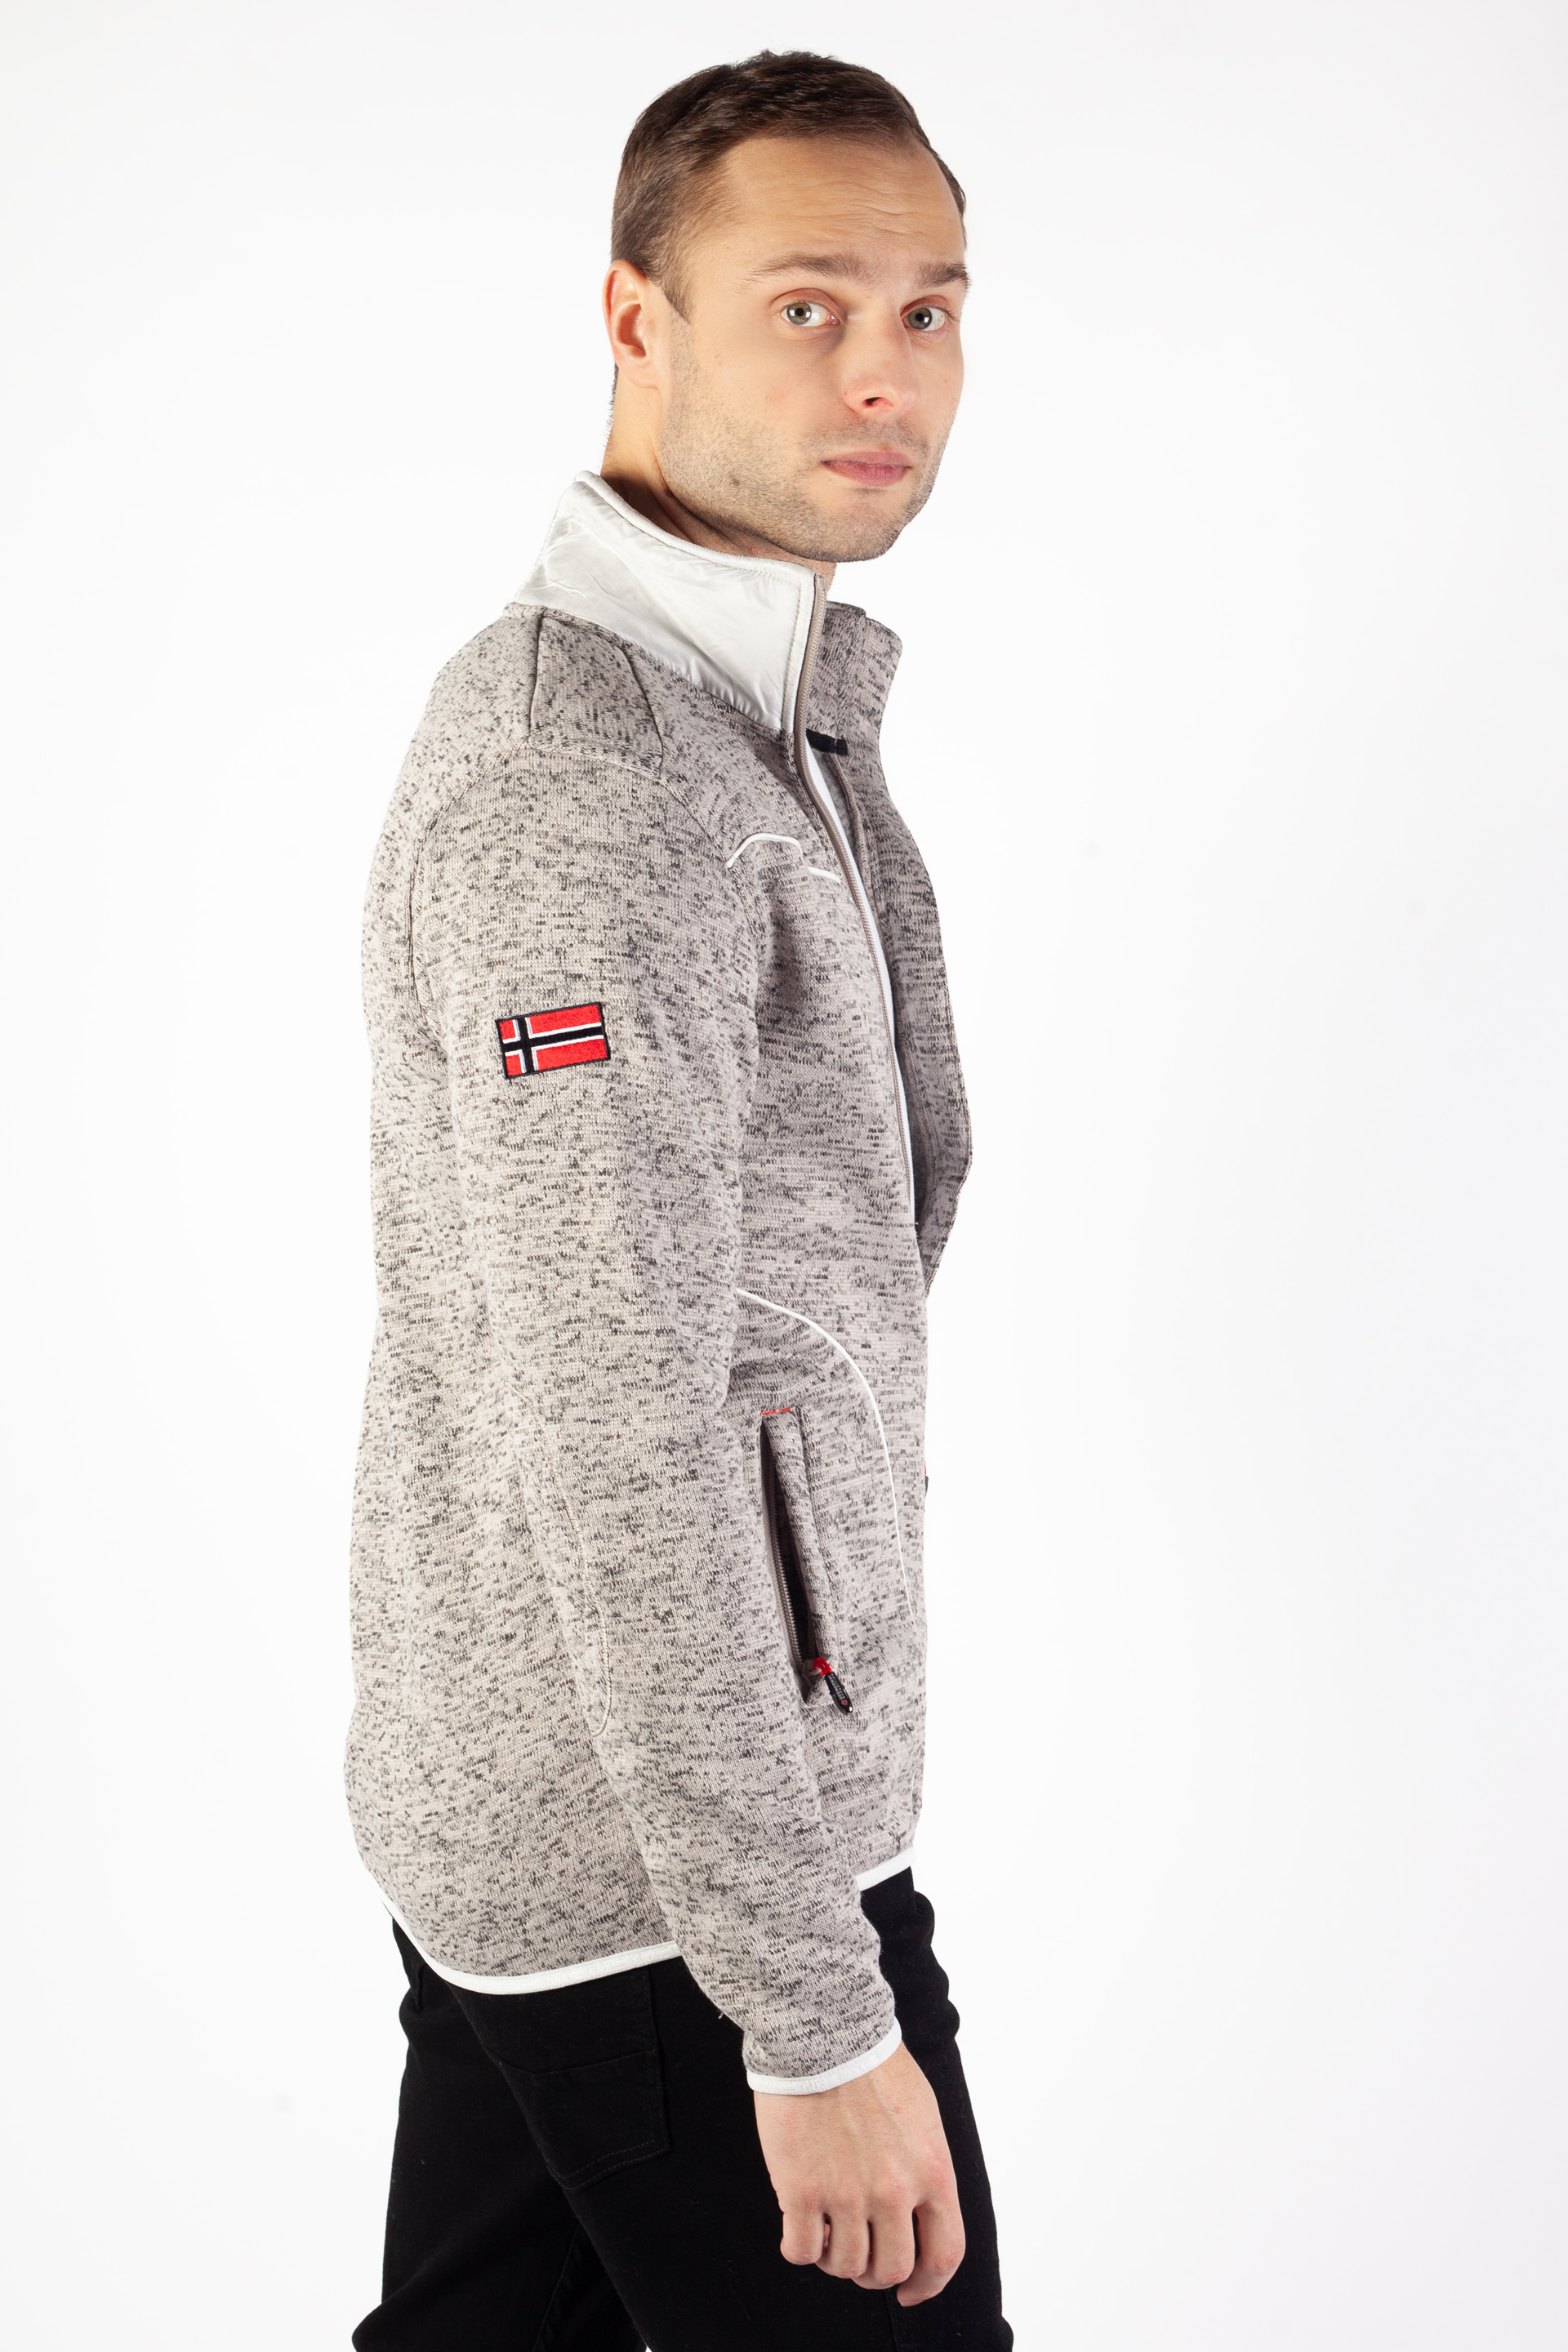 Sweatjacke GEOGRAPHICAL NORWAY TOUMBA-Blended-Grey